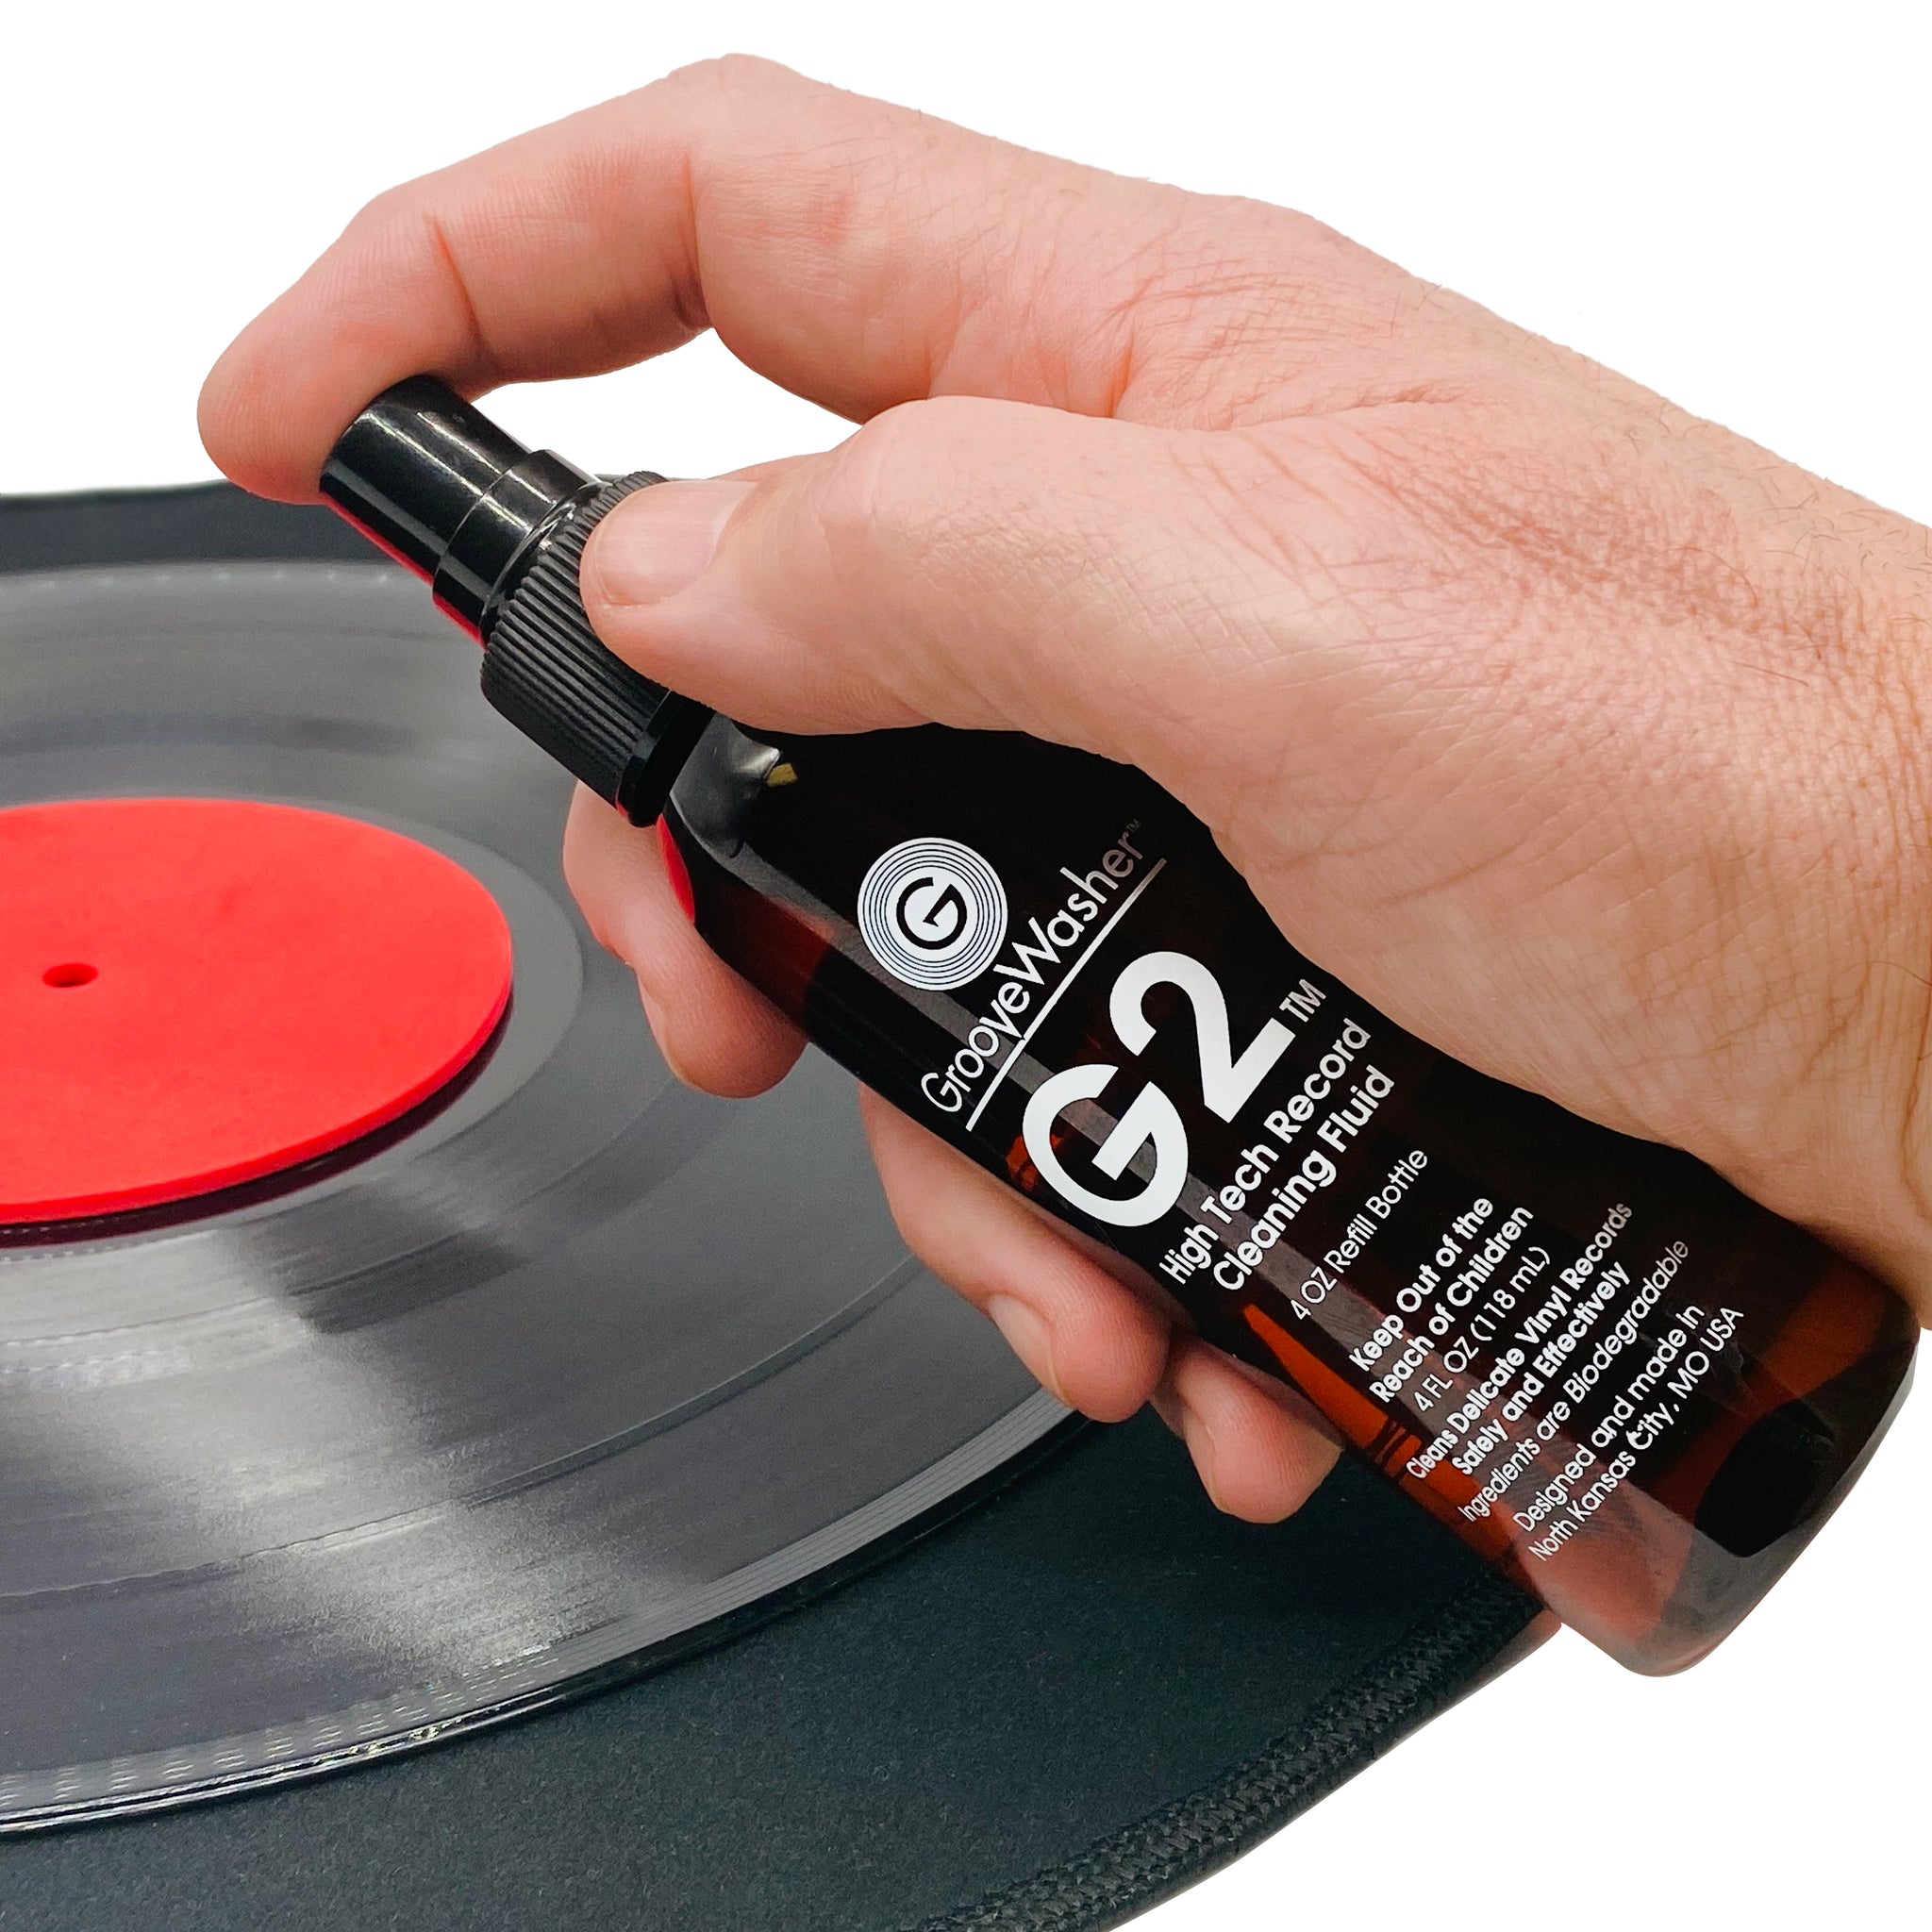 GrooveWasher G2 Cleaning Fluid sprayed on record with record label protector